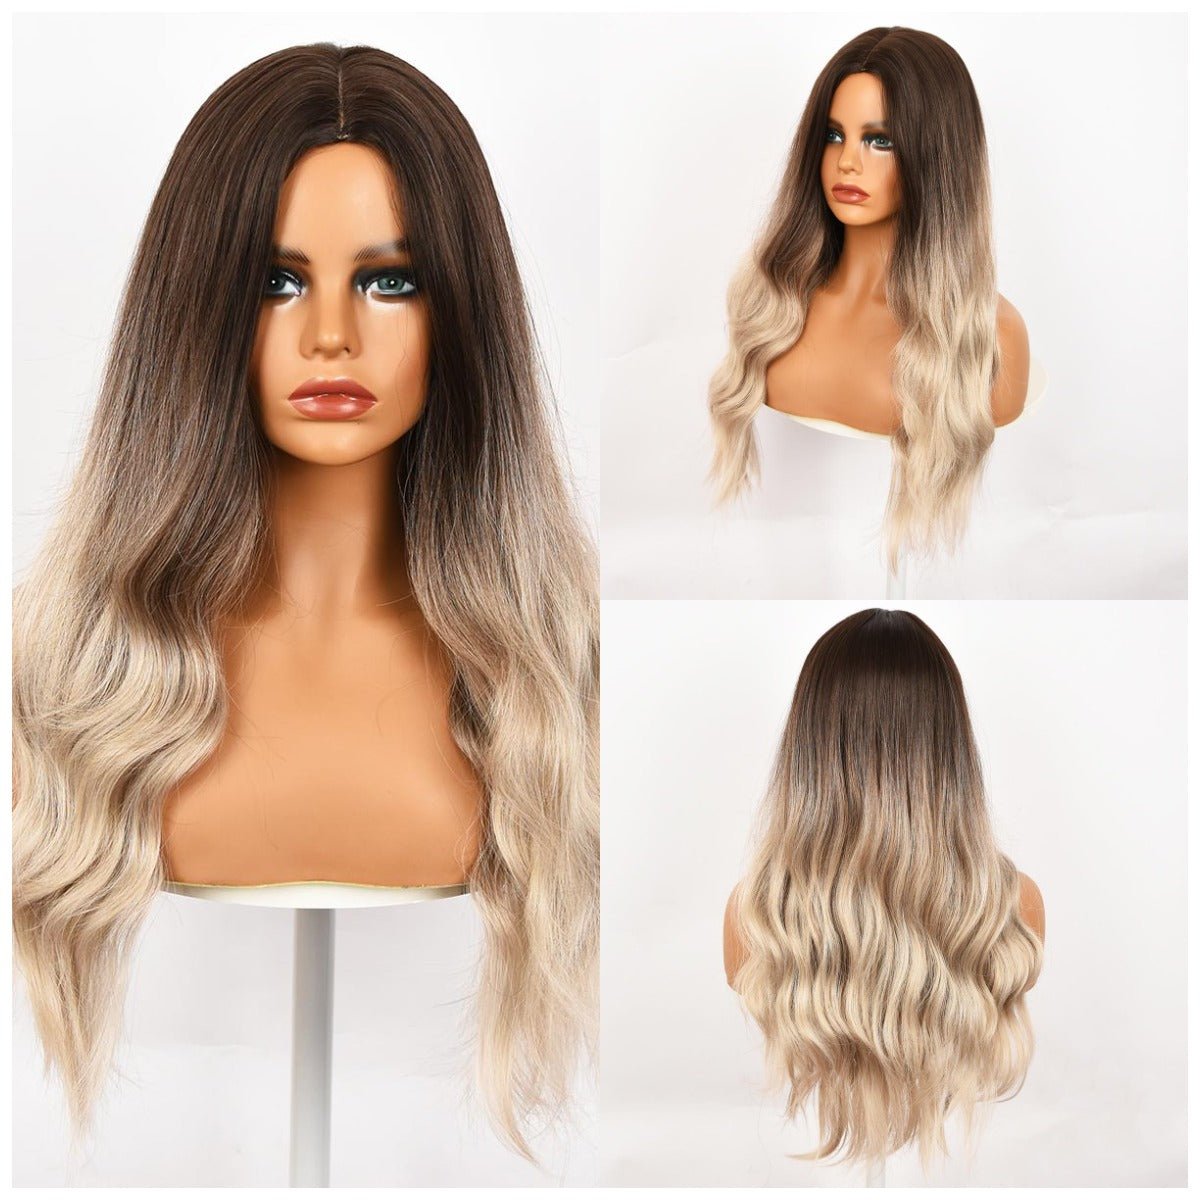 28-inch | Golden Gradient Loose Wave without Hair Bangs | SM8052 - TapLike